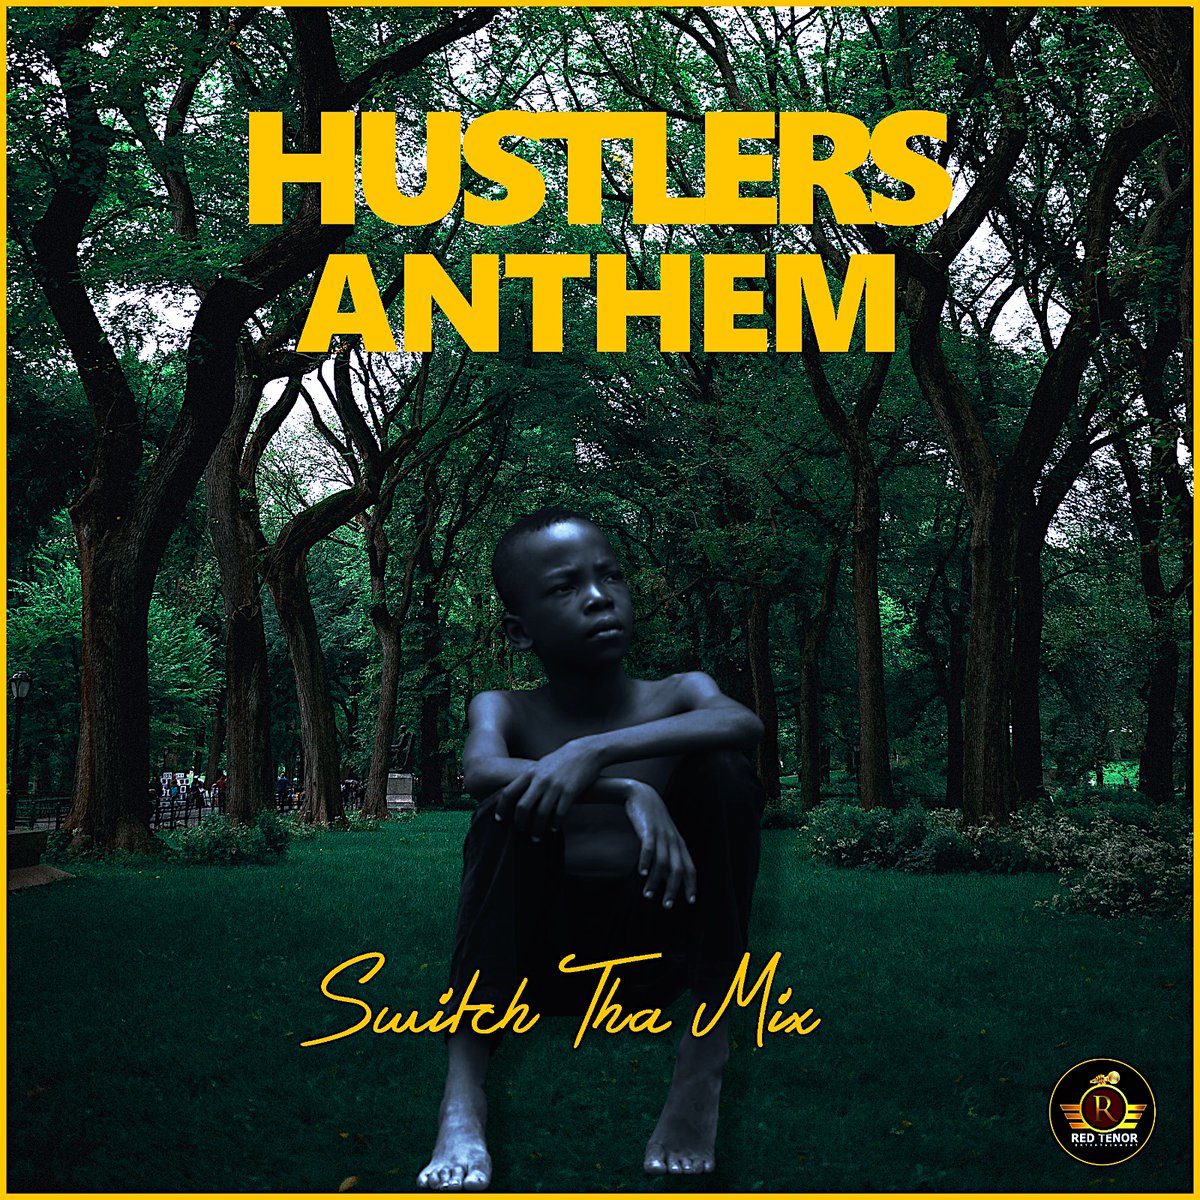 Official artwork for 'Hustlers Anthem'.
The song drops on the 4/2/2021.

__
#switchthamix #music #musicproduction #musician #musicians #musicproducer #trending #entertainment #pressplay #instamusician #rnbmusic #hiphop #trapmusic #flstudio #cubase #homestudio #musicstudio